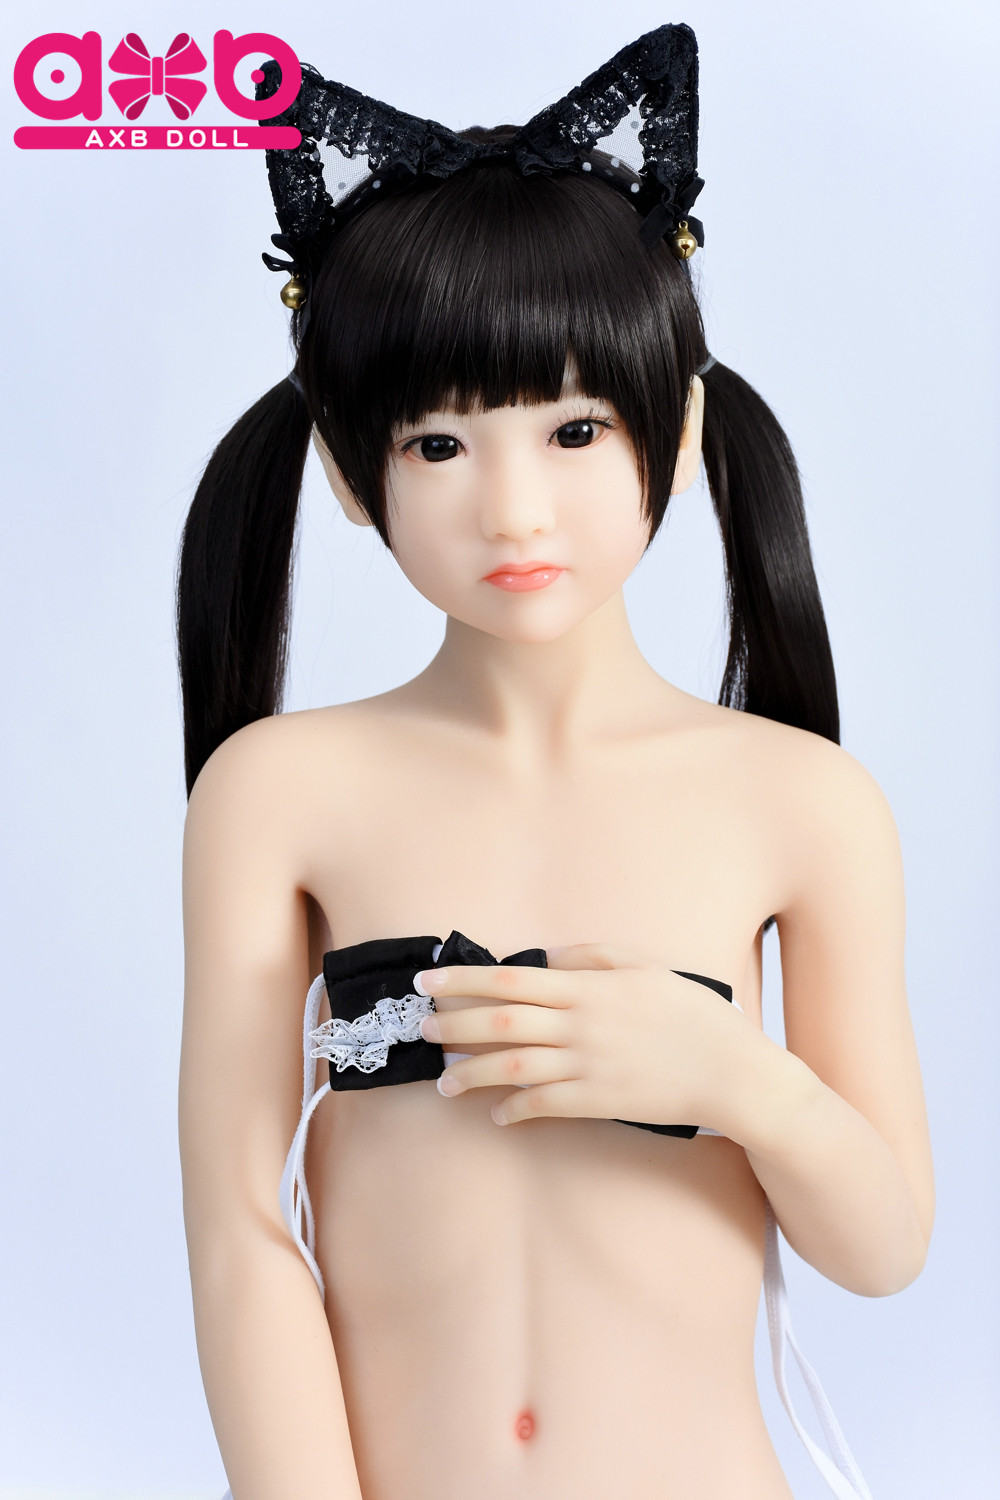 AXBDOLL A15# TPE Anime Love Doll - 画像をクリックして閉じます